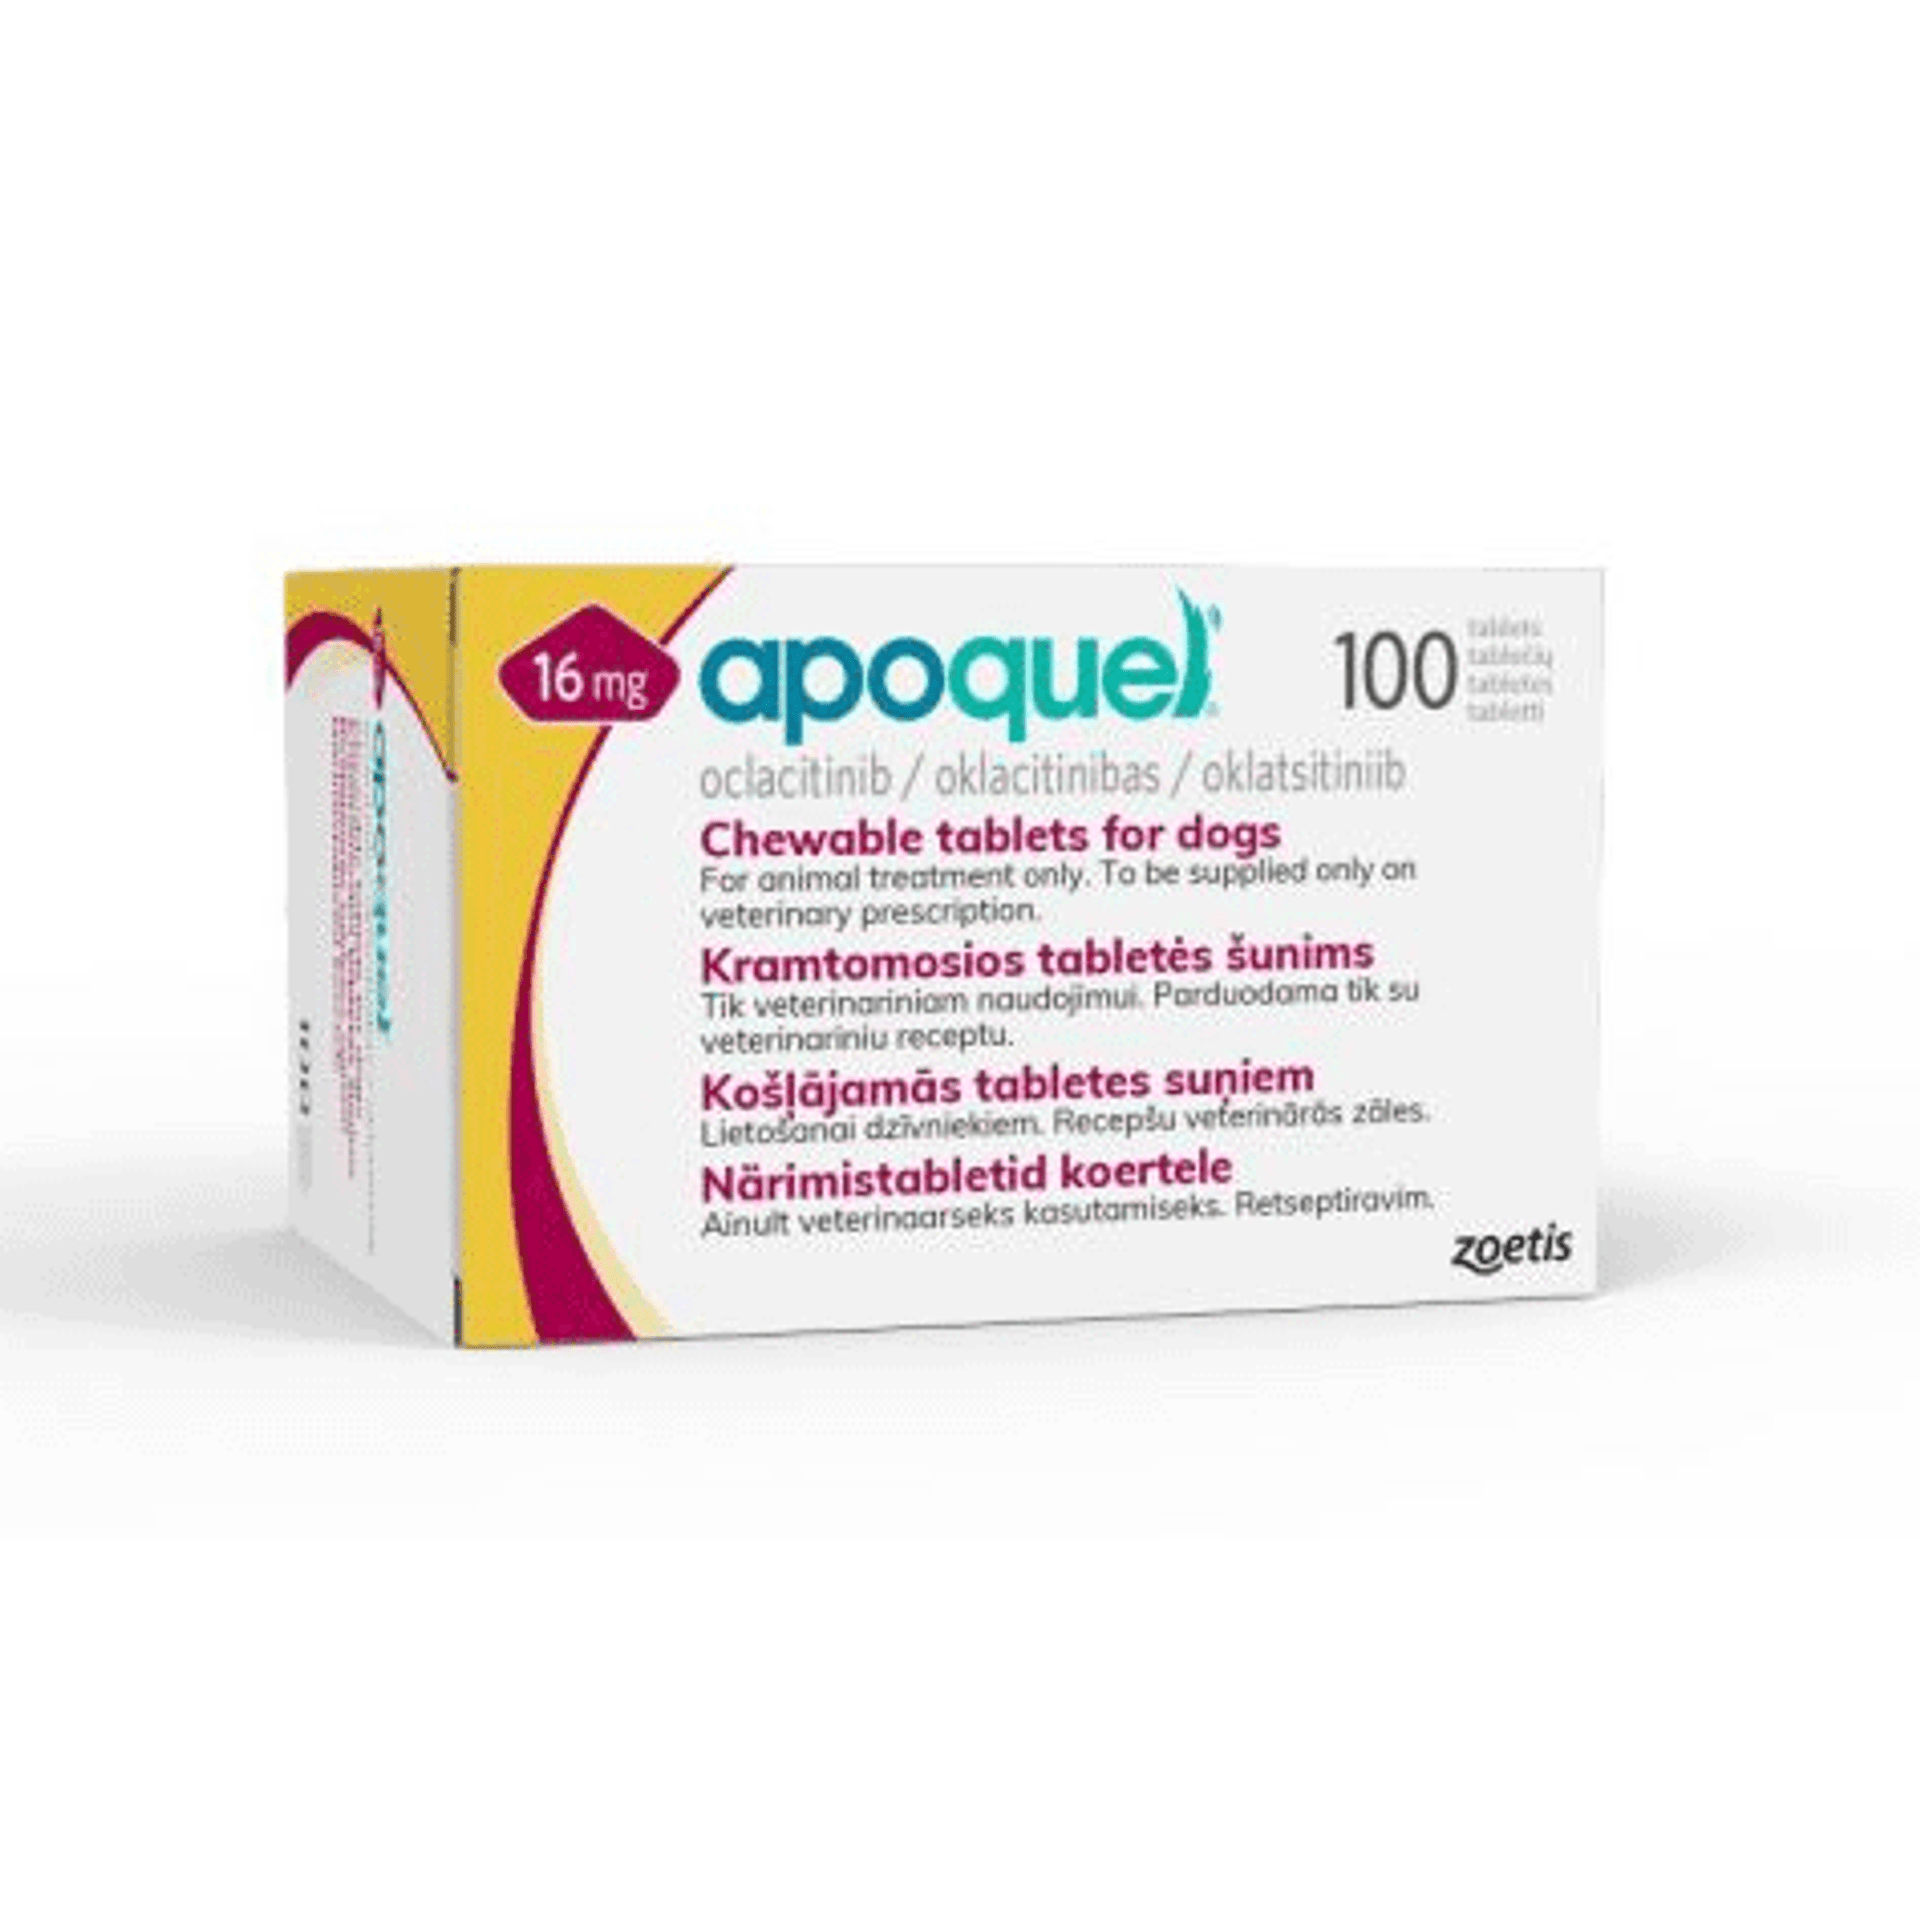 apoquel-16mg-chewable-tablets-for-dogs-hyperdrug